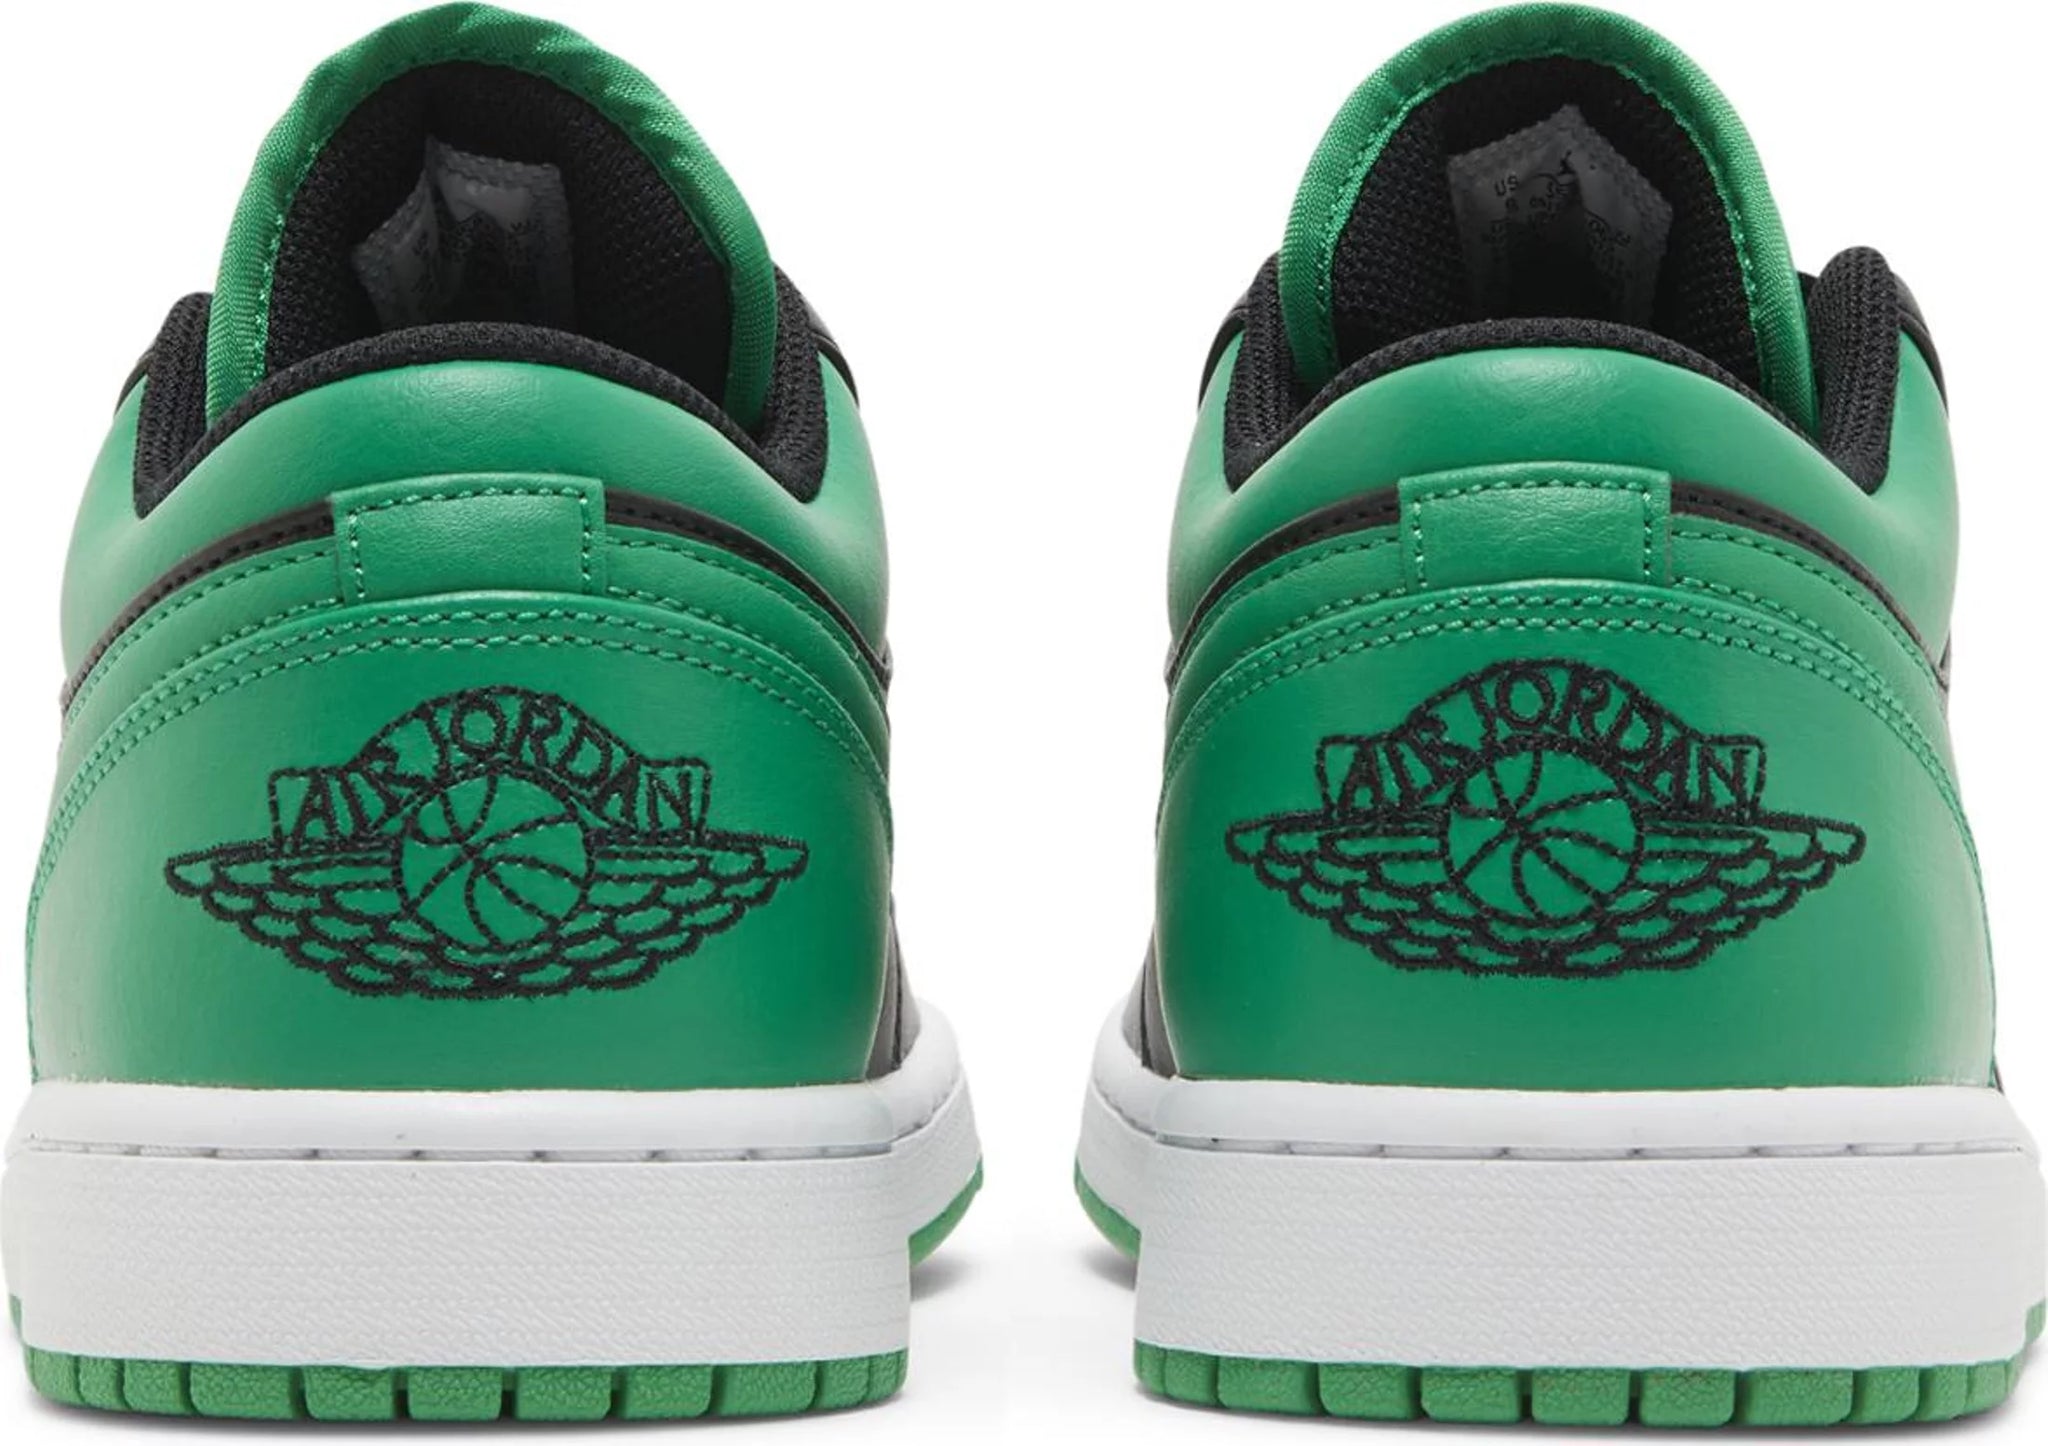 Double Boxed  299.99 Nike Air Jordan 1 Low Lucky Green Double Boxed